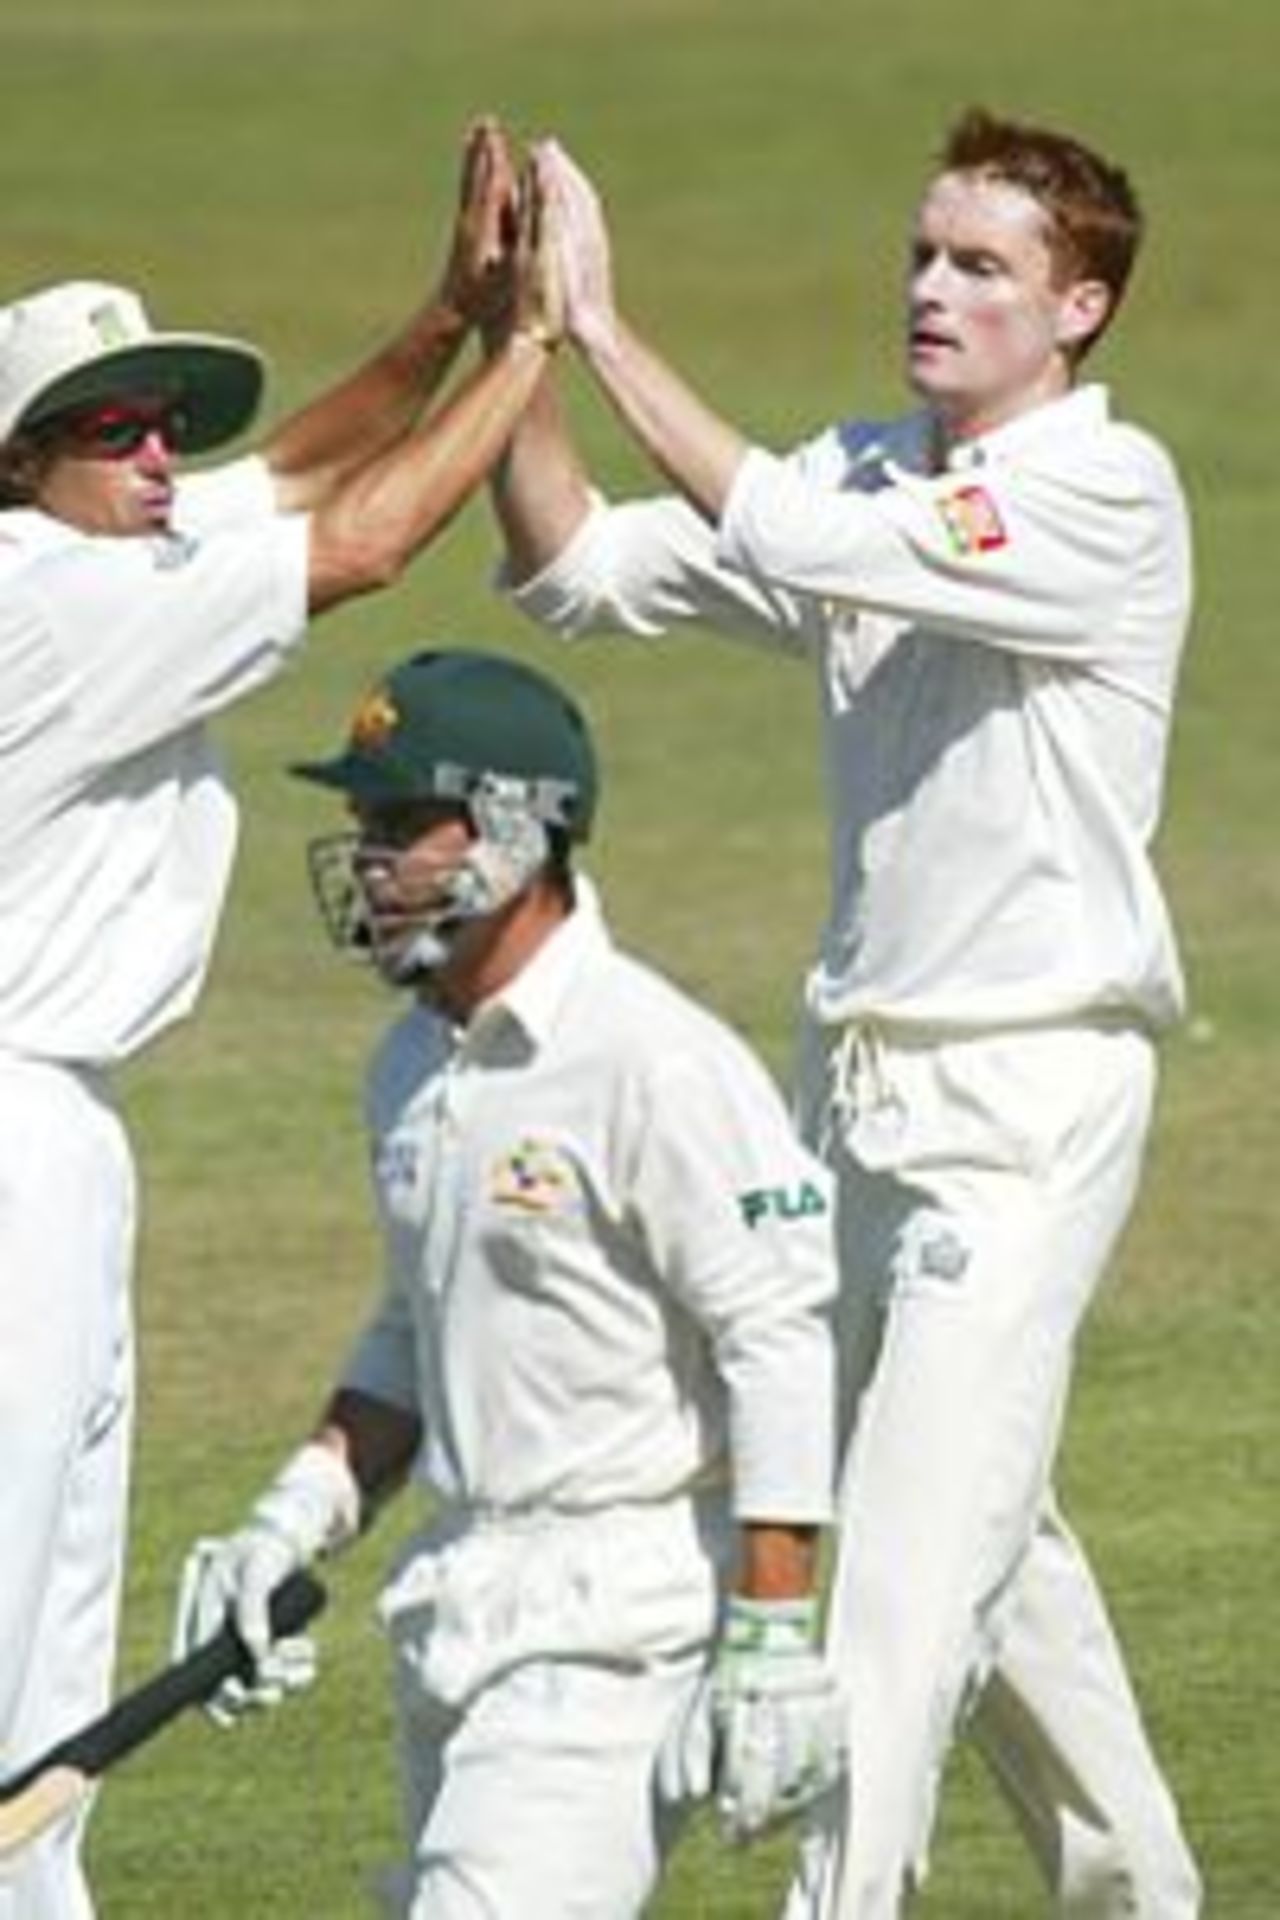 16 Mar 2002: David Terbrugge of South Africa celebrates the wicket of Justin Langer during the second day of the third test between South Africa and Australia, played at Kingsmead, Durban, South Africa.